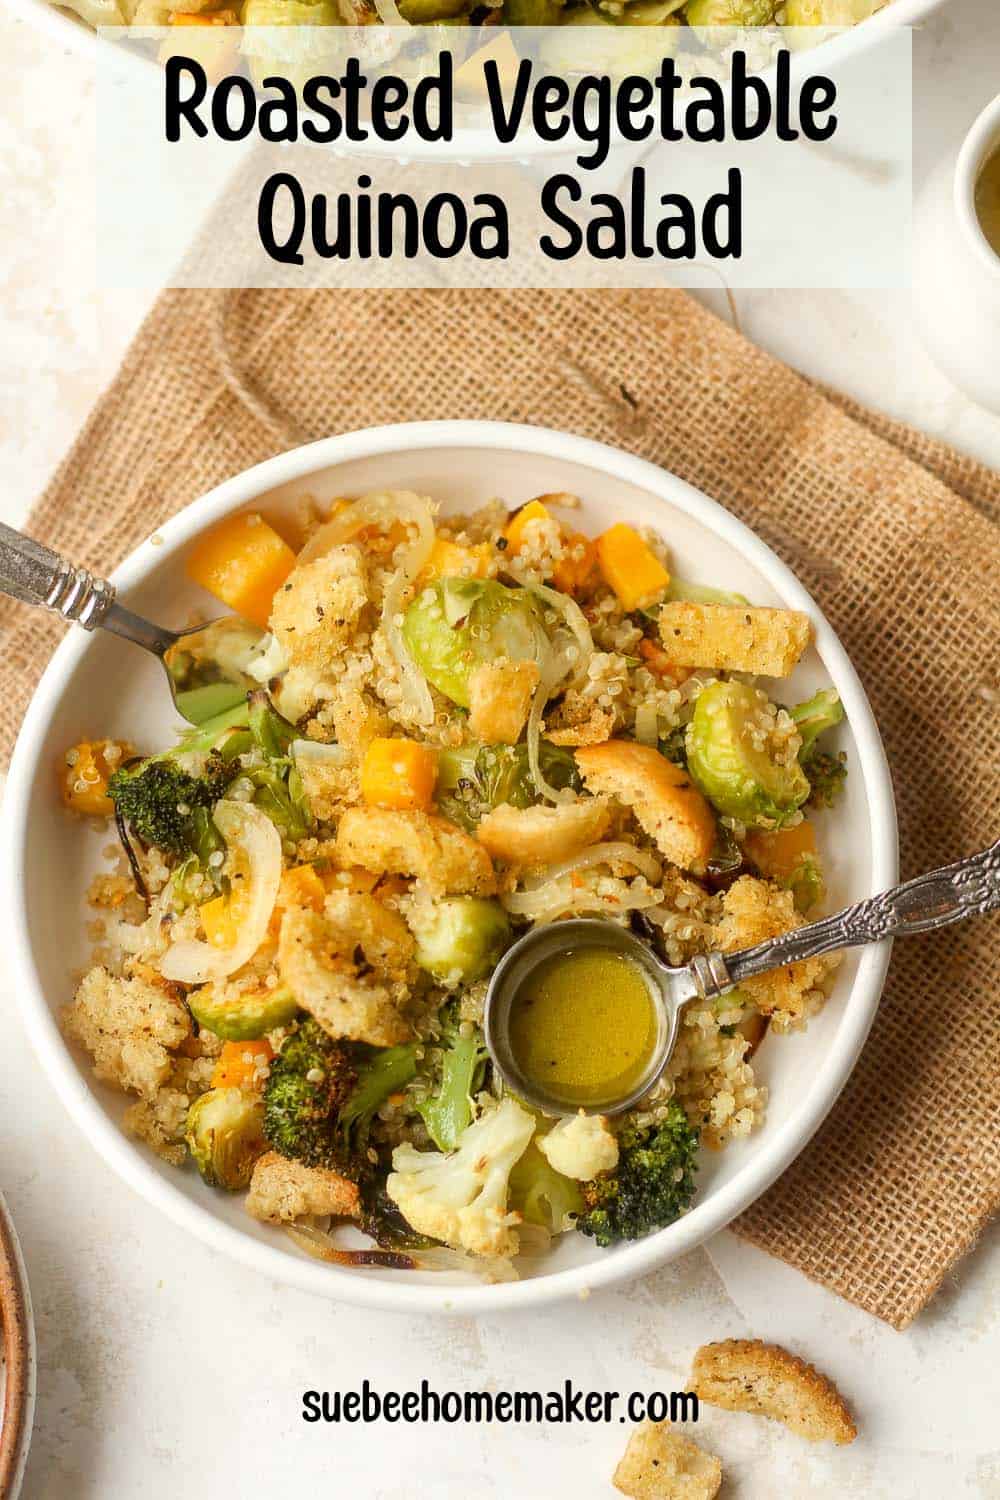 A serving of roasted vegetable quinoa salad with a tablespoon of lemon dressing and homemade croutons.